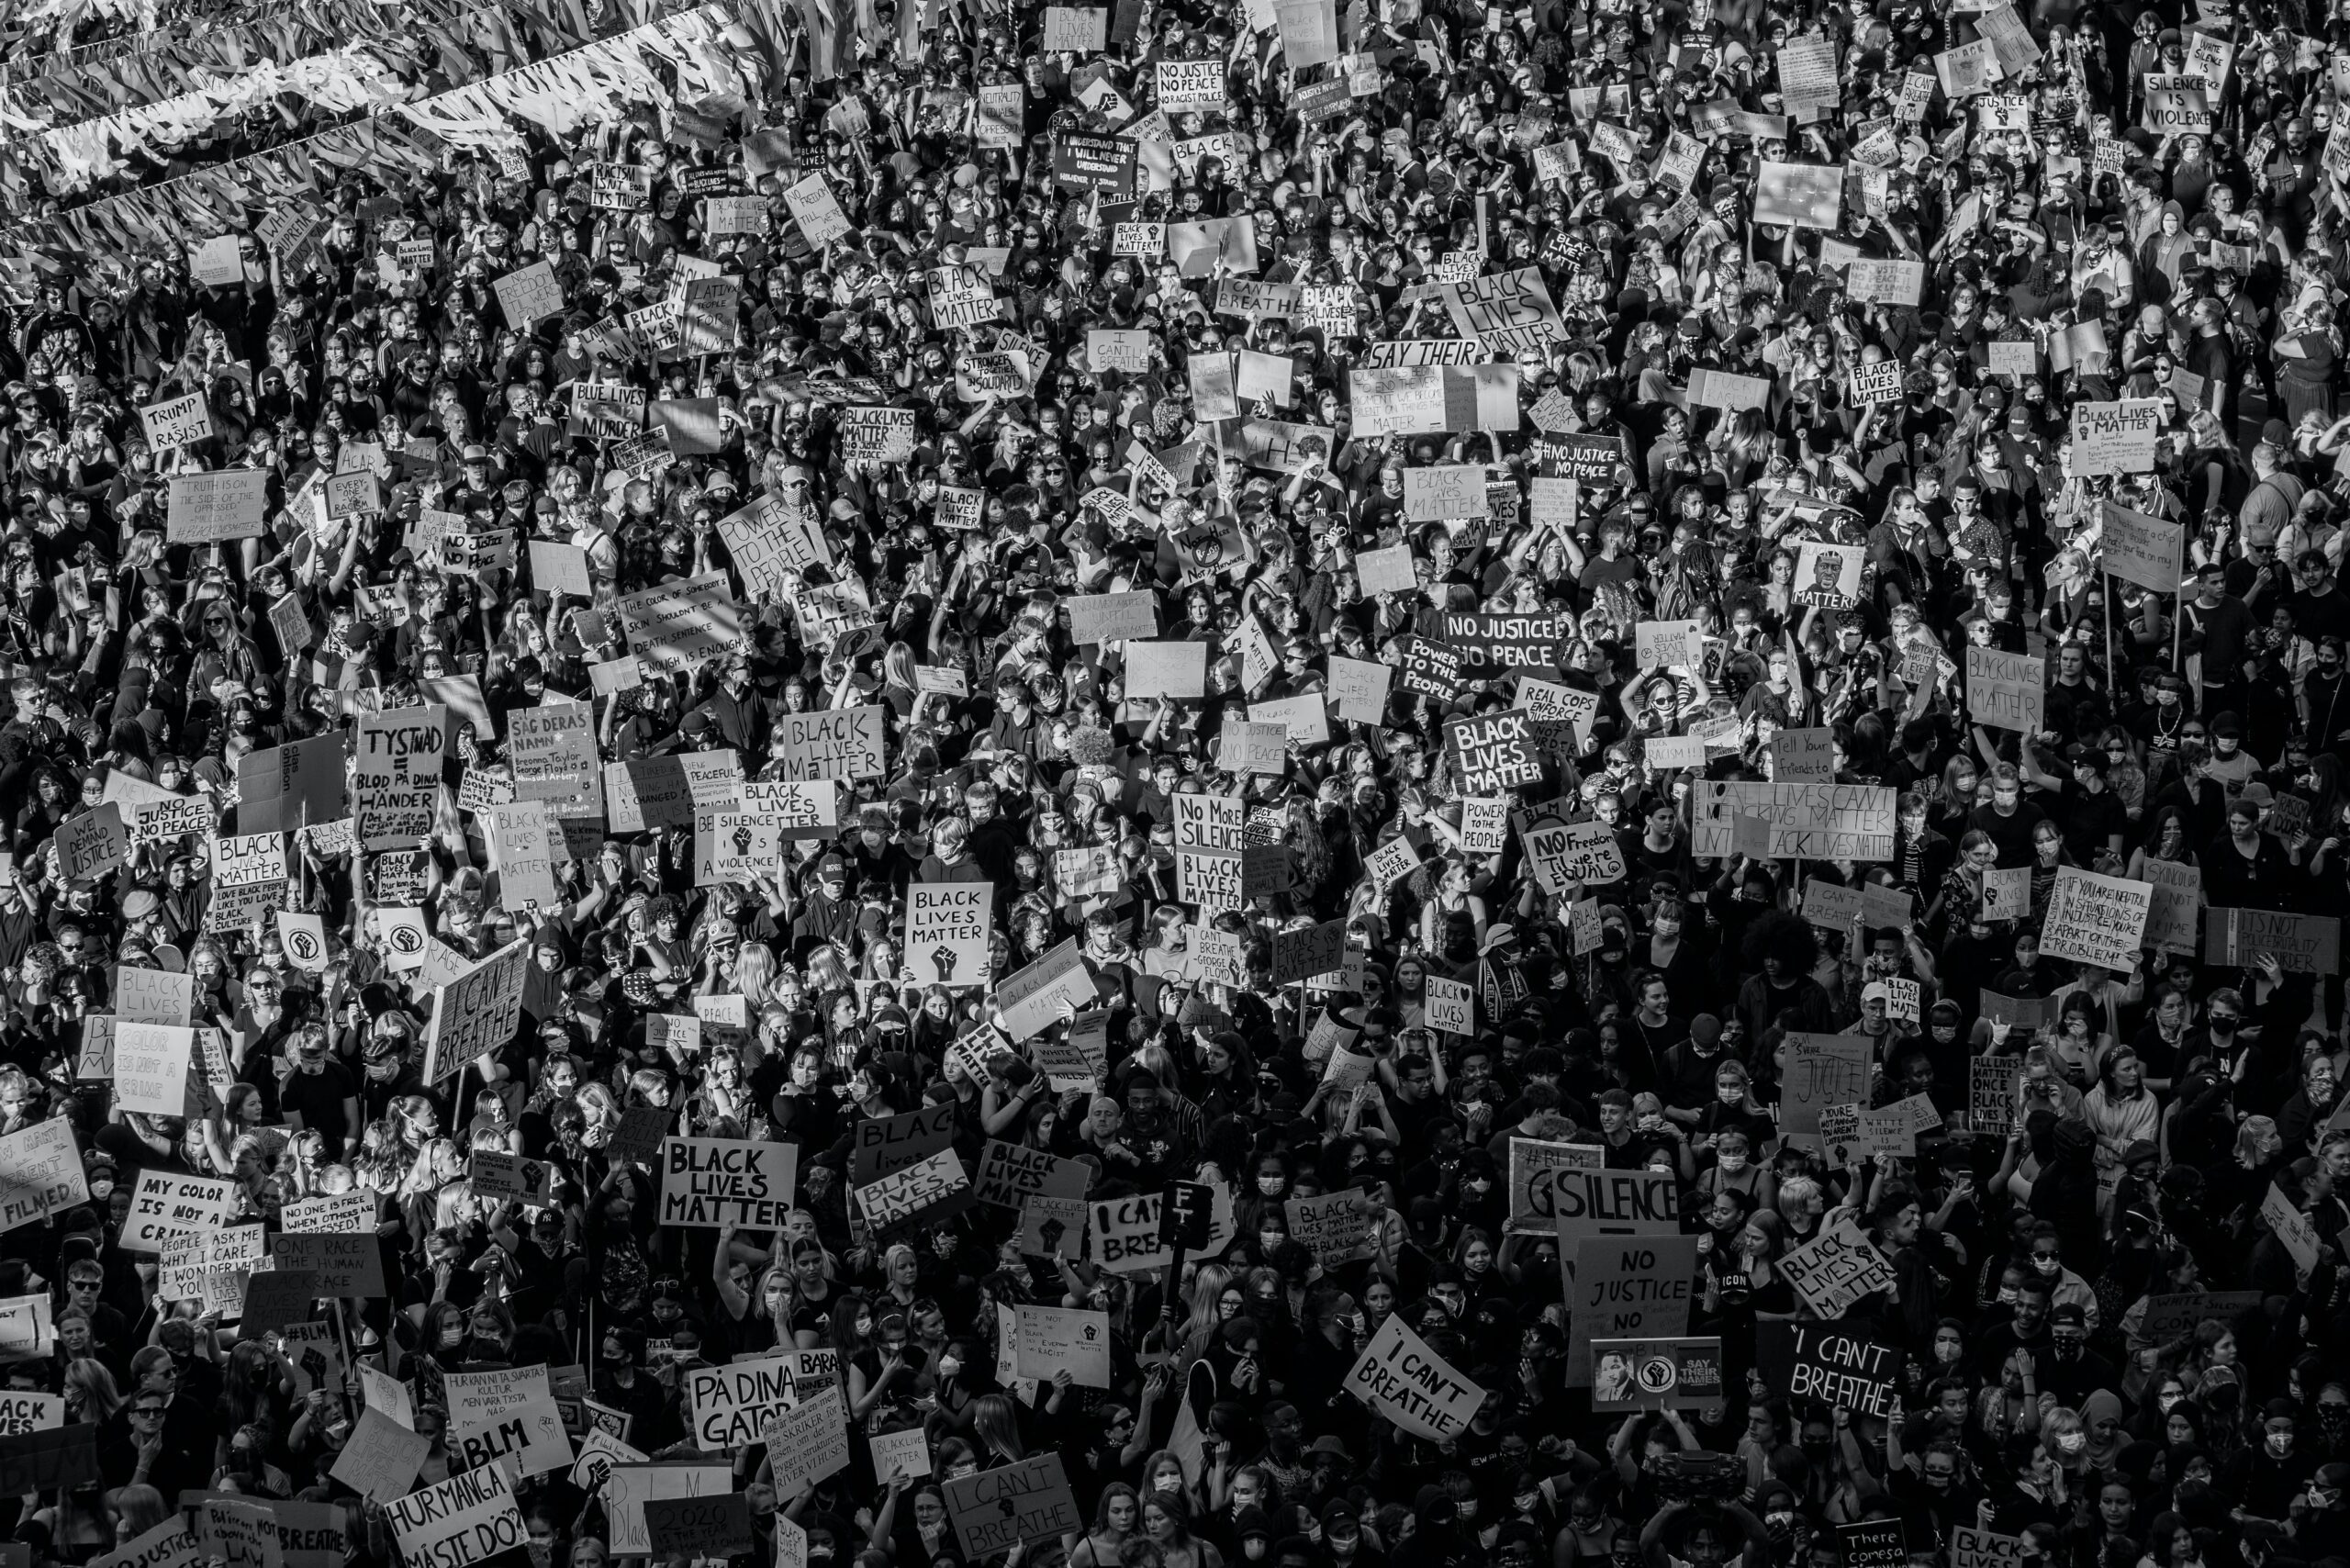 Large mass gathering of protestors at Black Lives Matter protest, with many holding signs. Photo is in black and white.